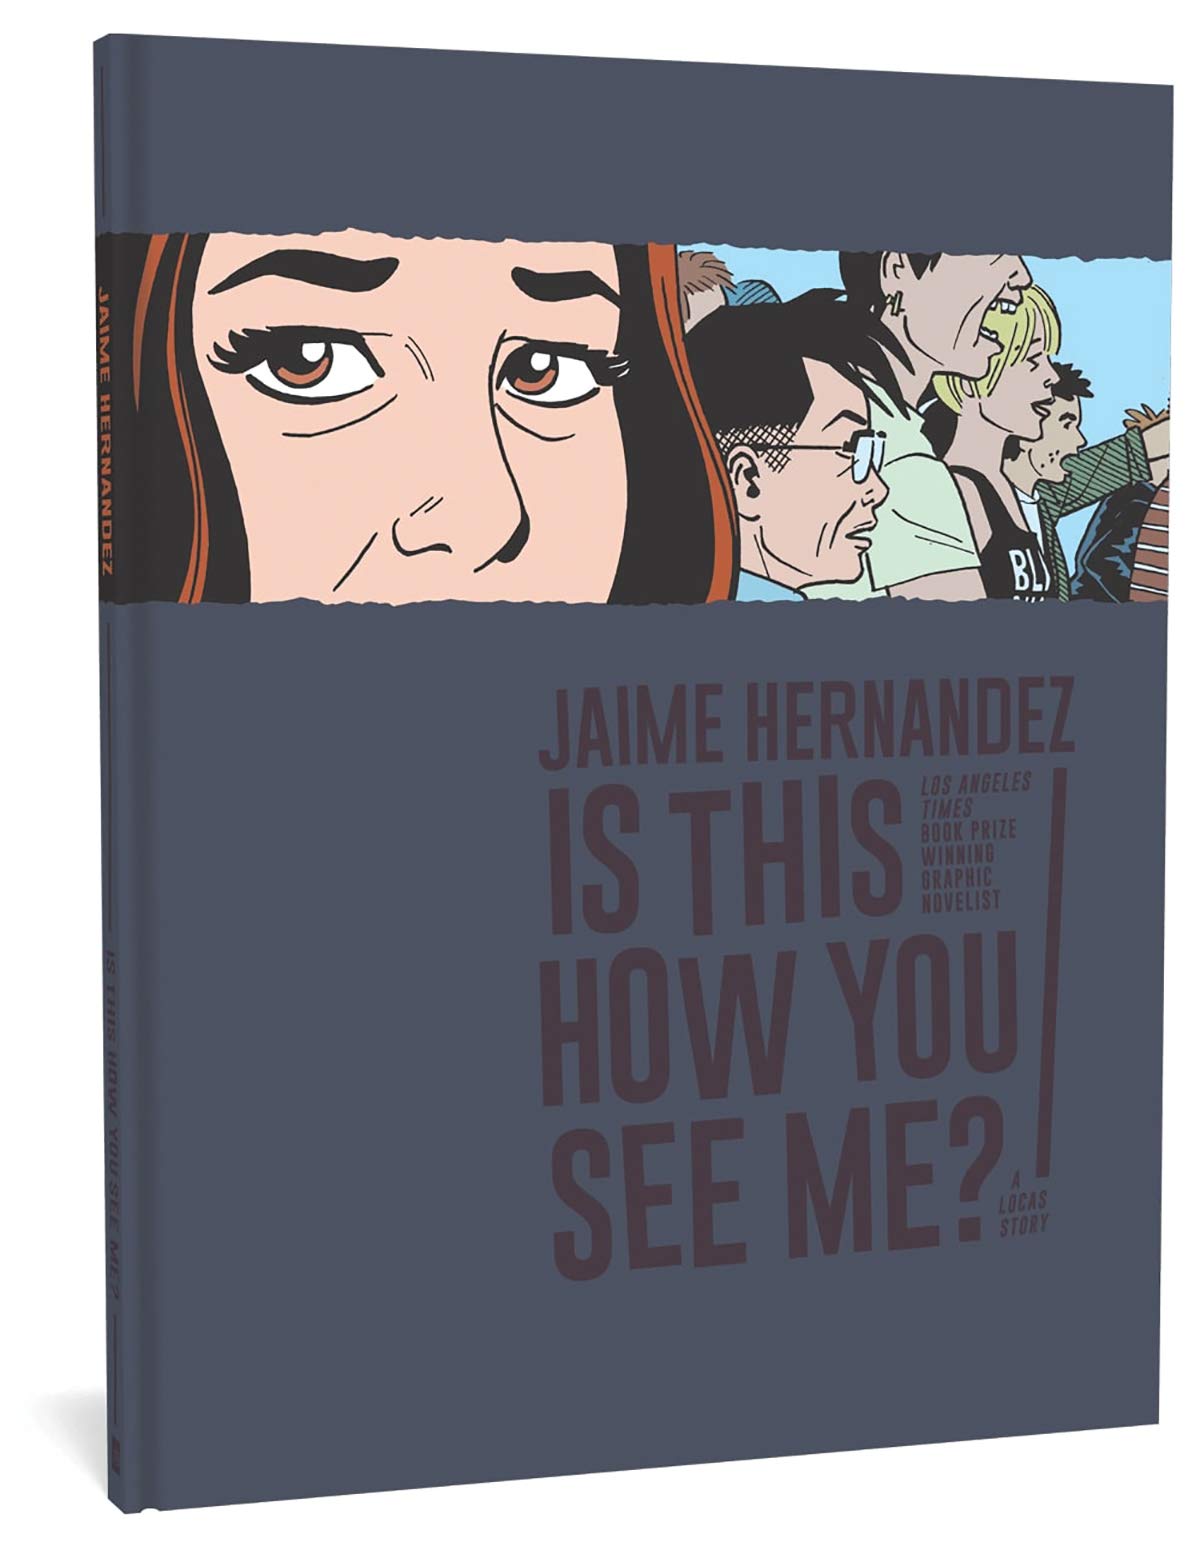 Best Comics of 2019: Is This How You See Me?